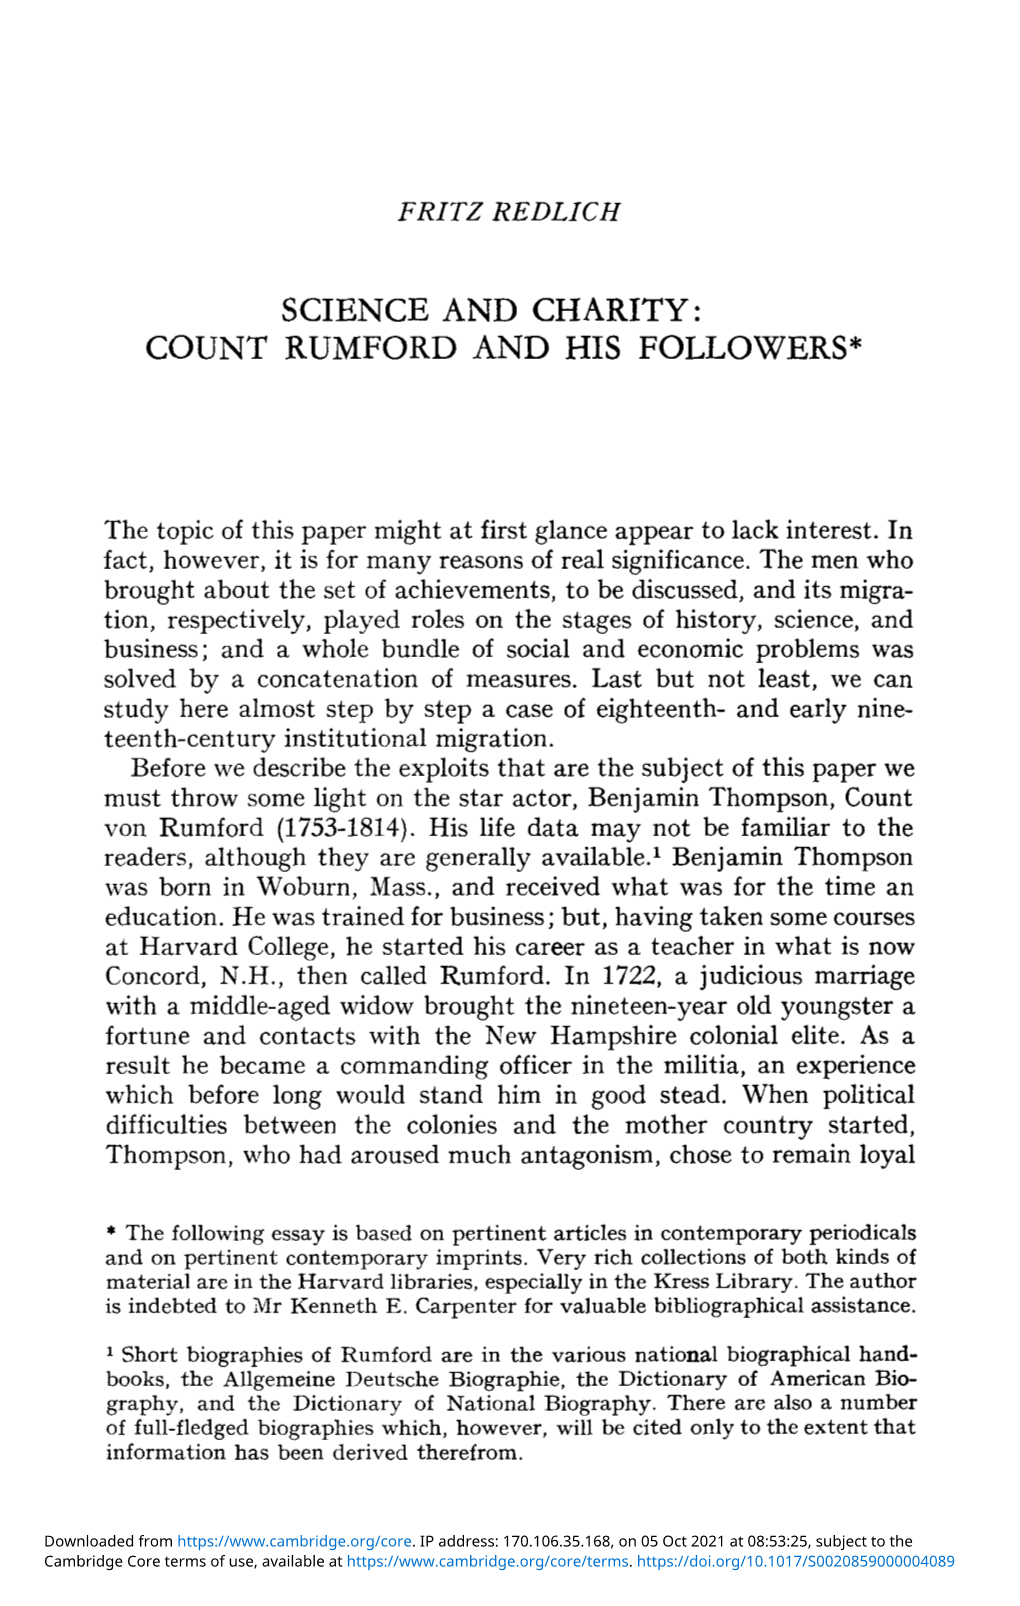 Science and Charity: Count Rumford and His Followers*